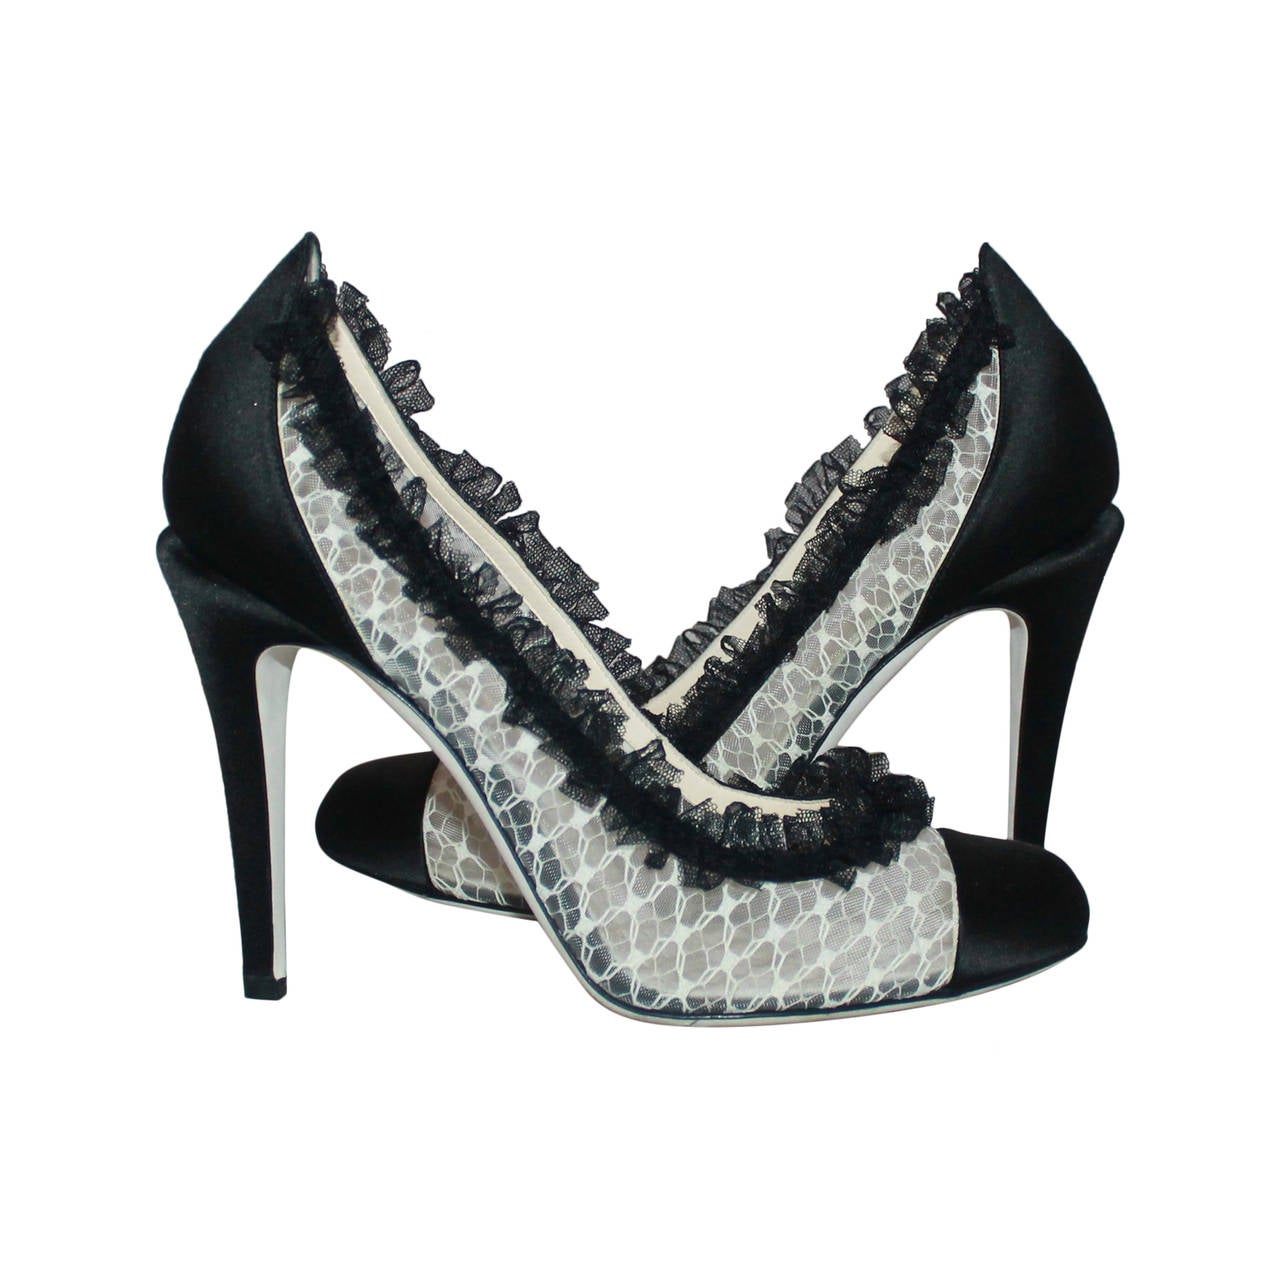 Chanel Ivory & Black Lace Pumps with Ruffle Trim - 40